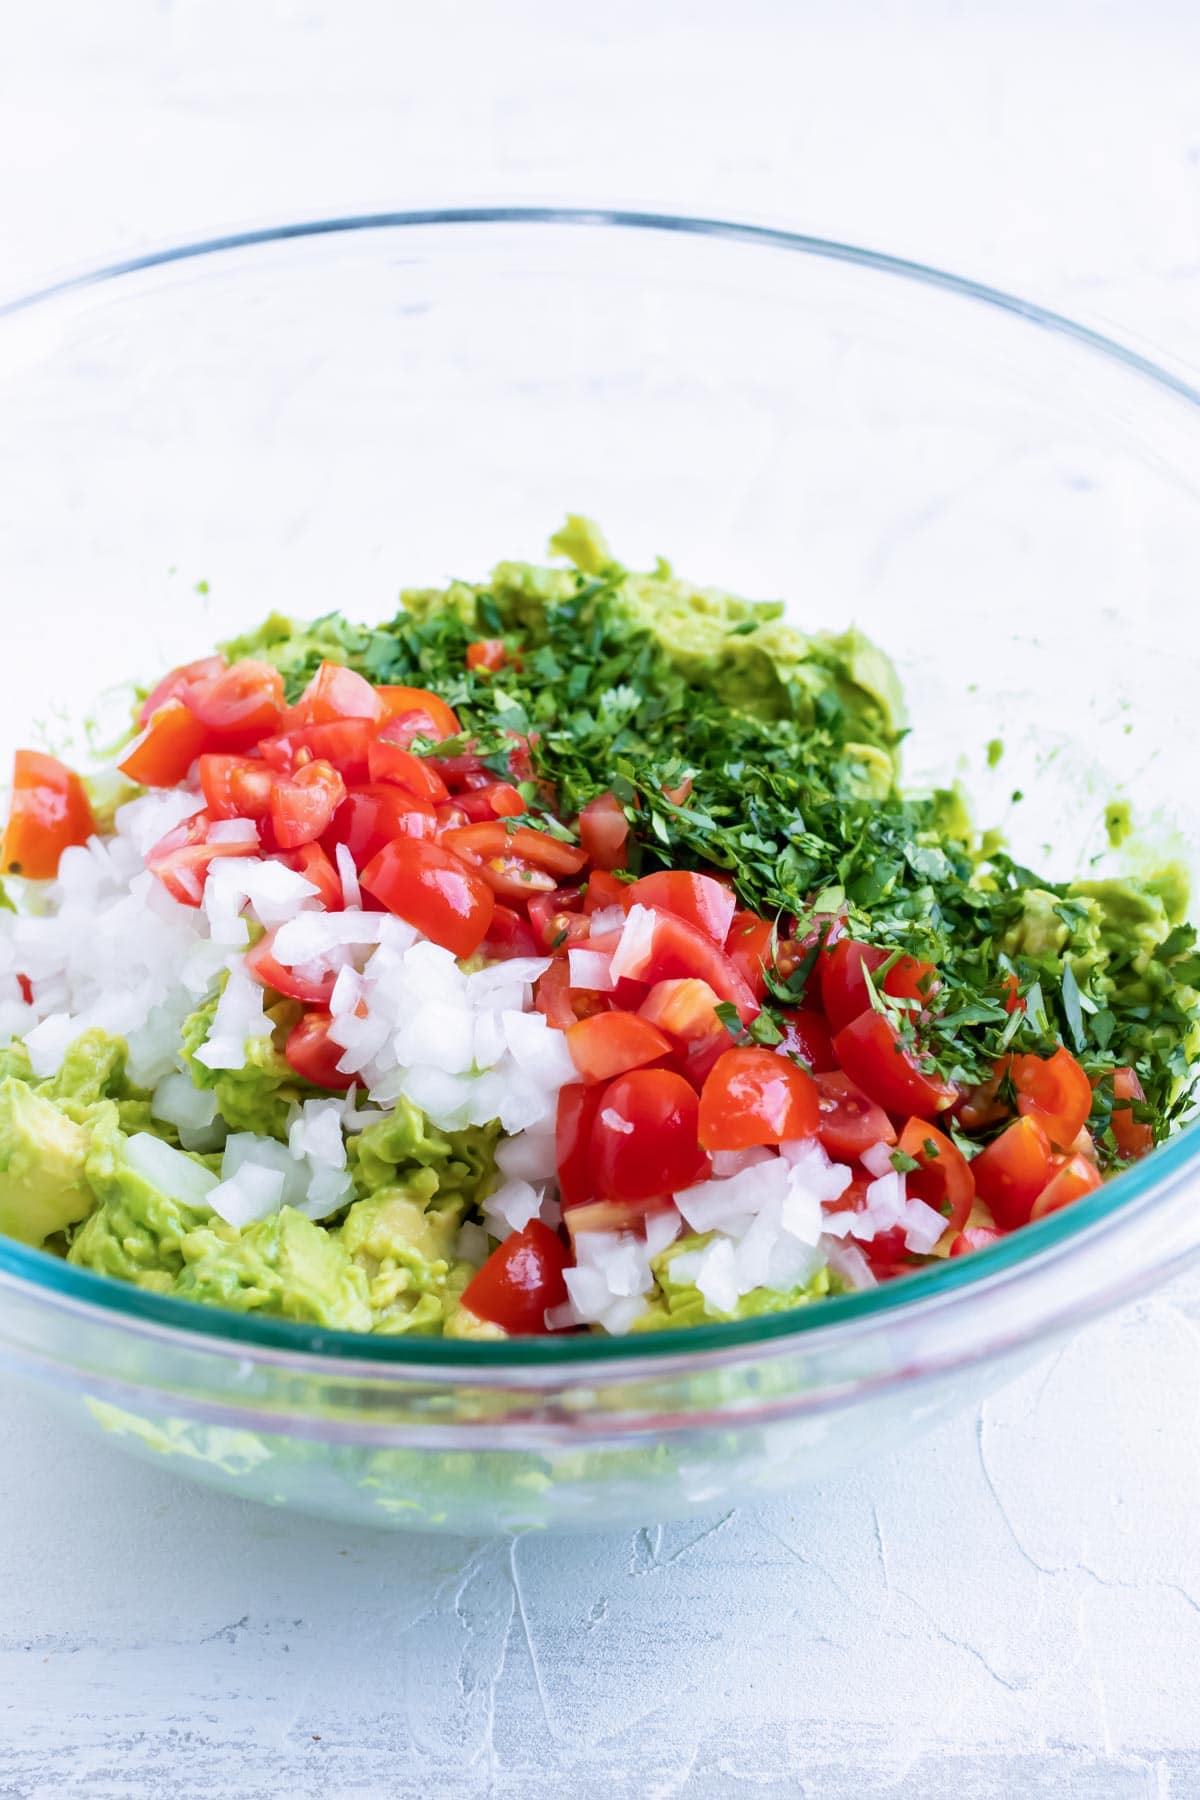 Combining onions, tomatoes, and cilantro to mashed avocados in a clear bowl.